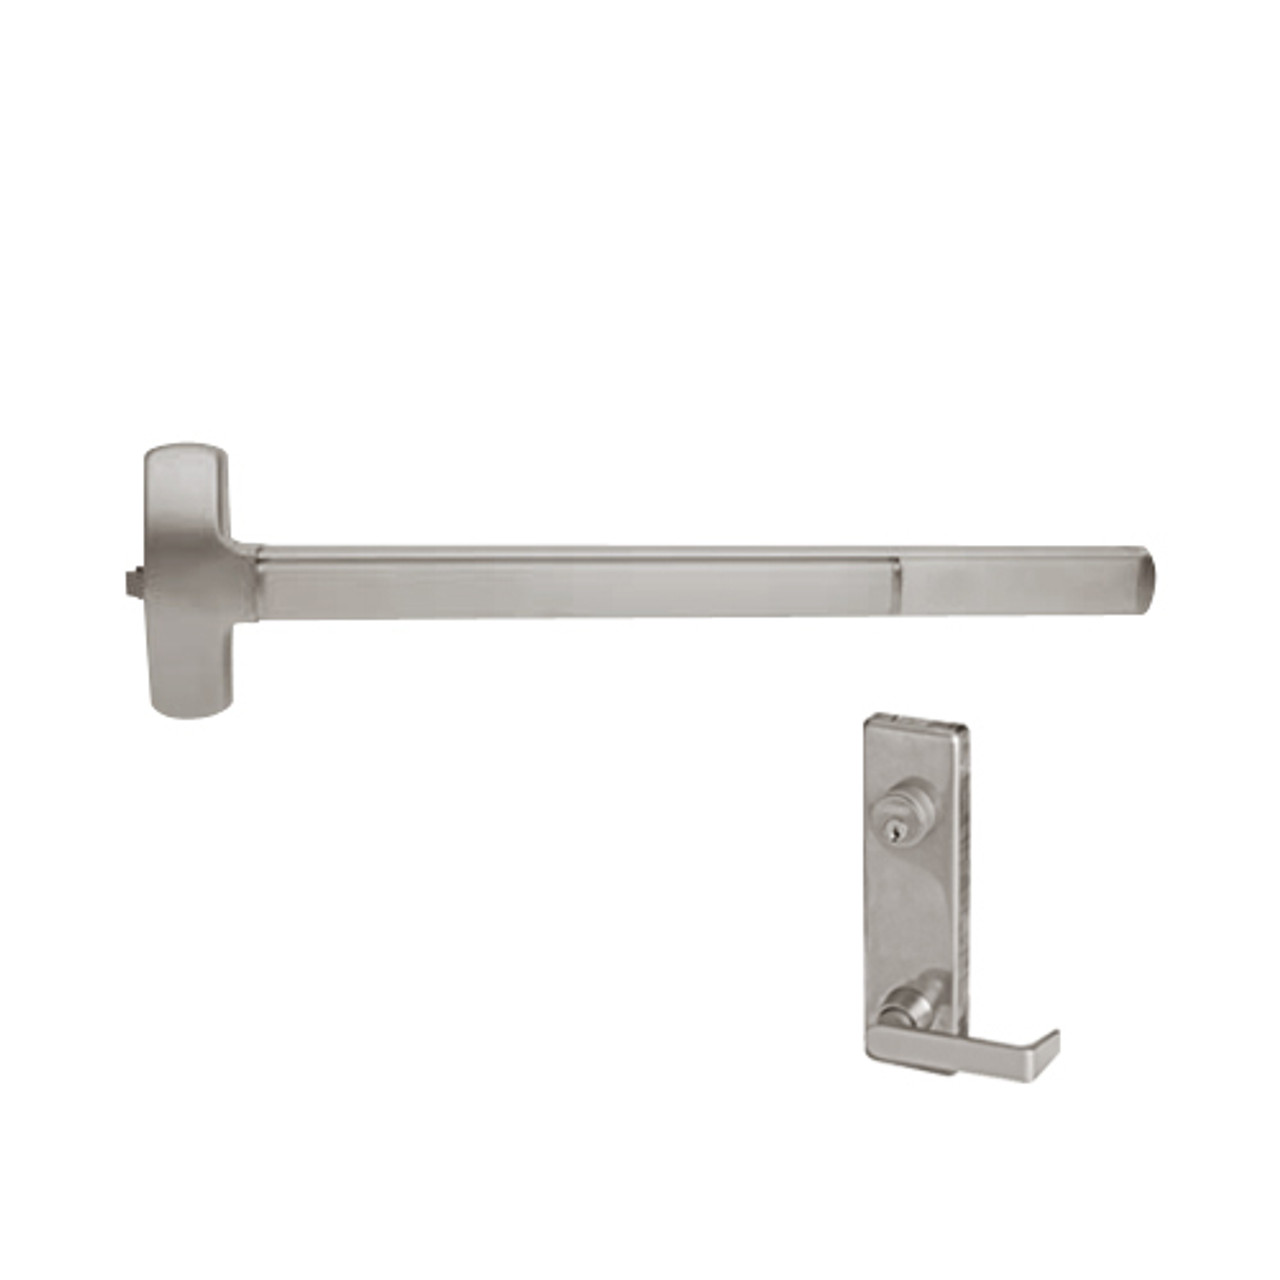 F-25-R-L-NL-DANE-US32D-3-LHR Falcon Exit Device in Satin Stainless Steel